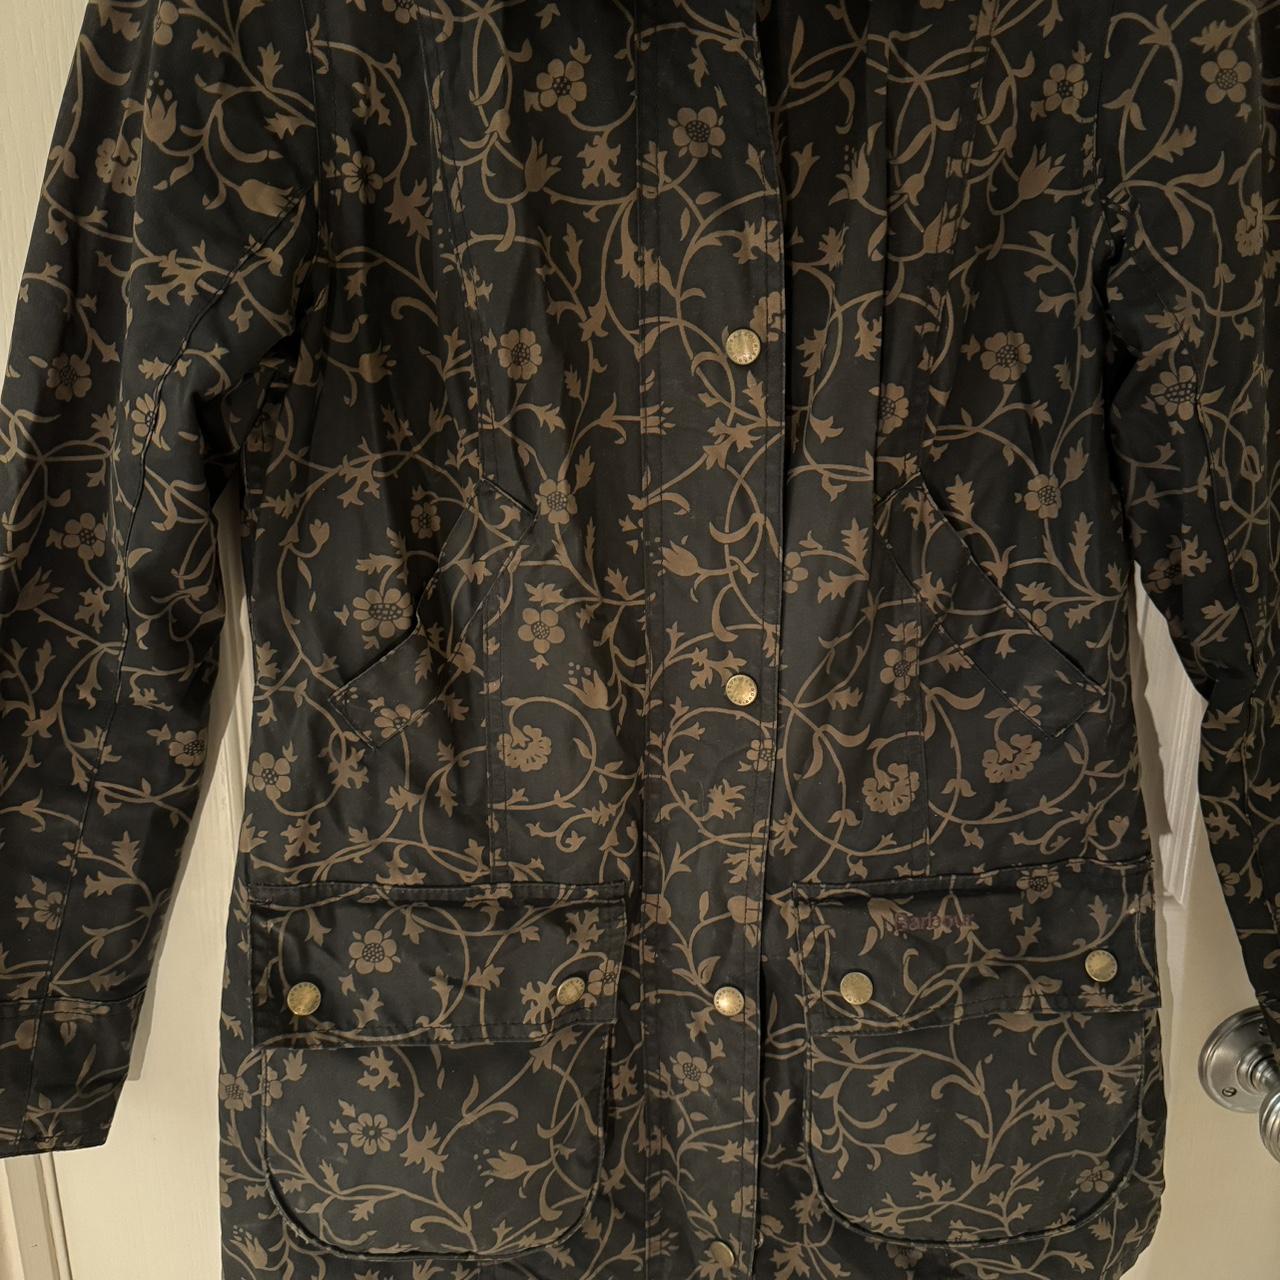 Barbour limited edition William Morris print wax